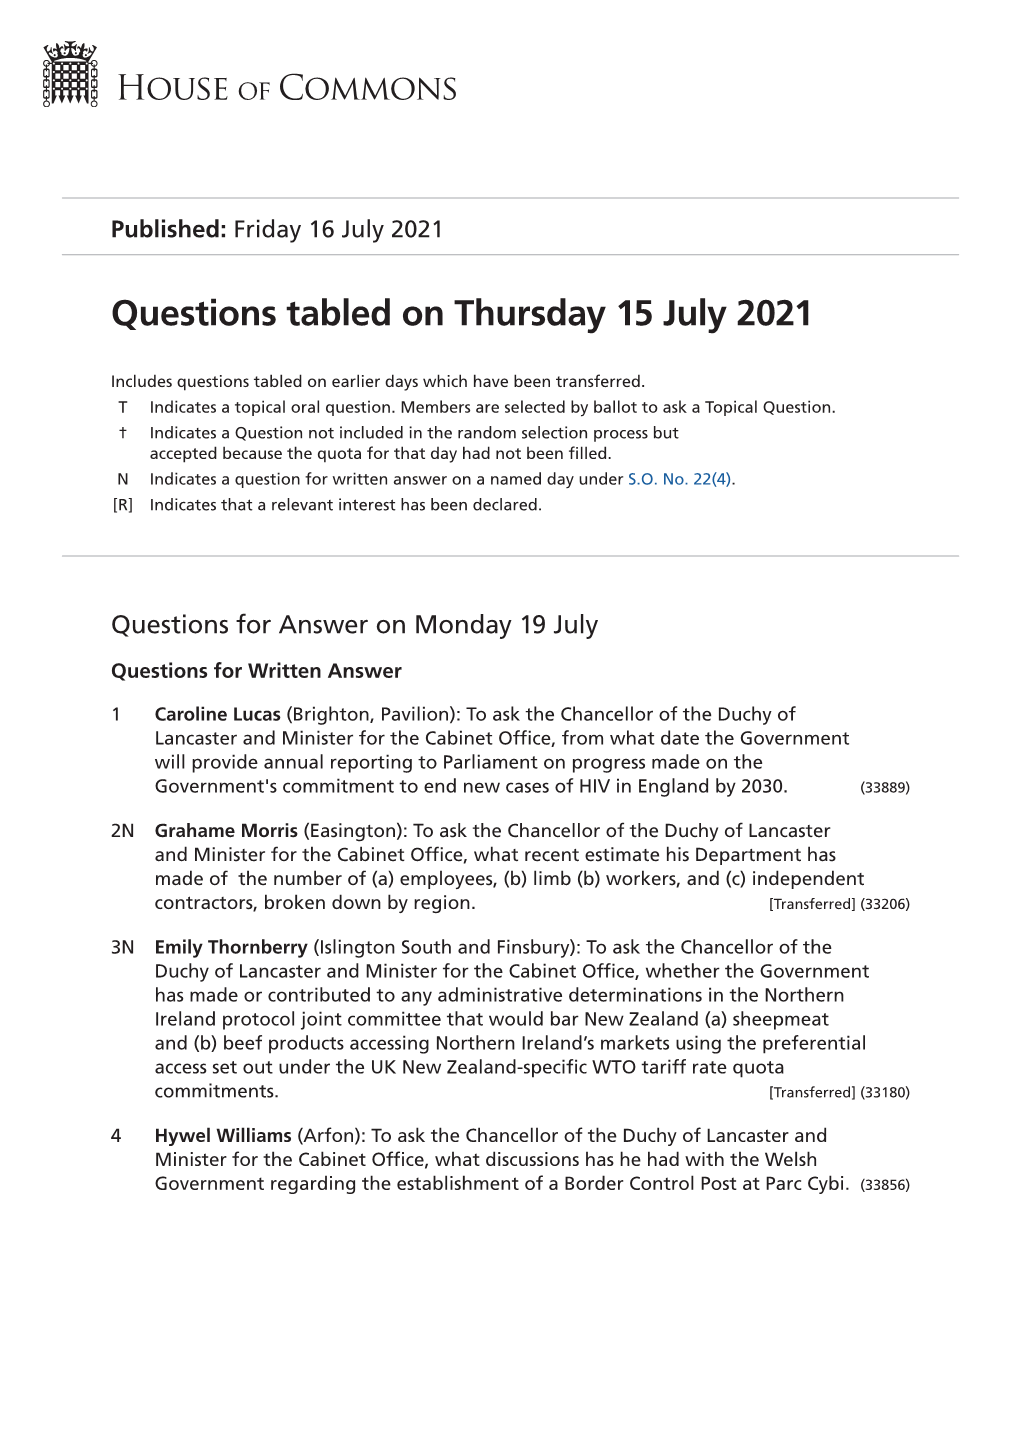 View Questions Tabled PDF File 0.24 MB